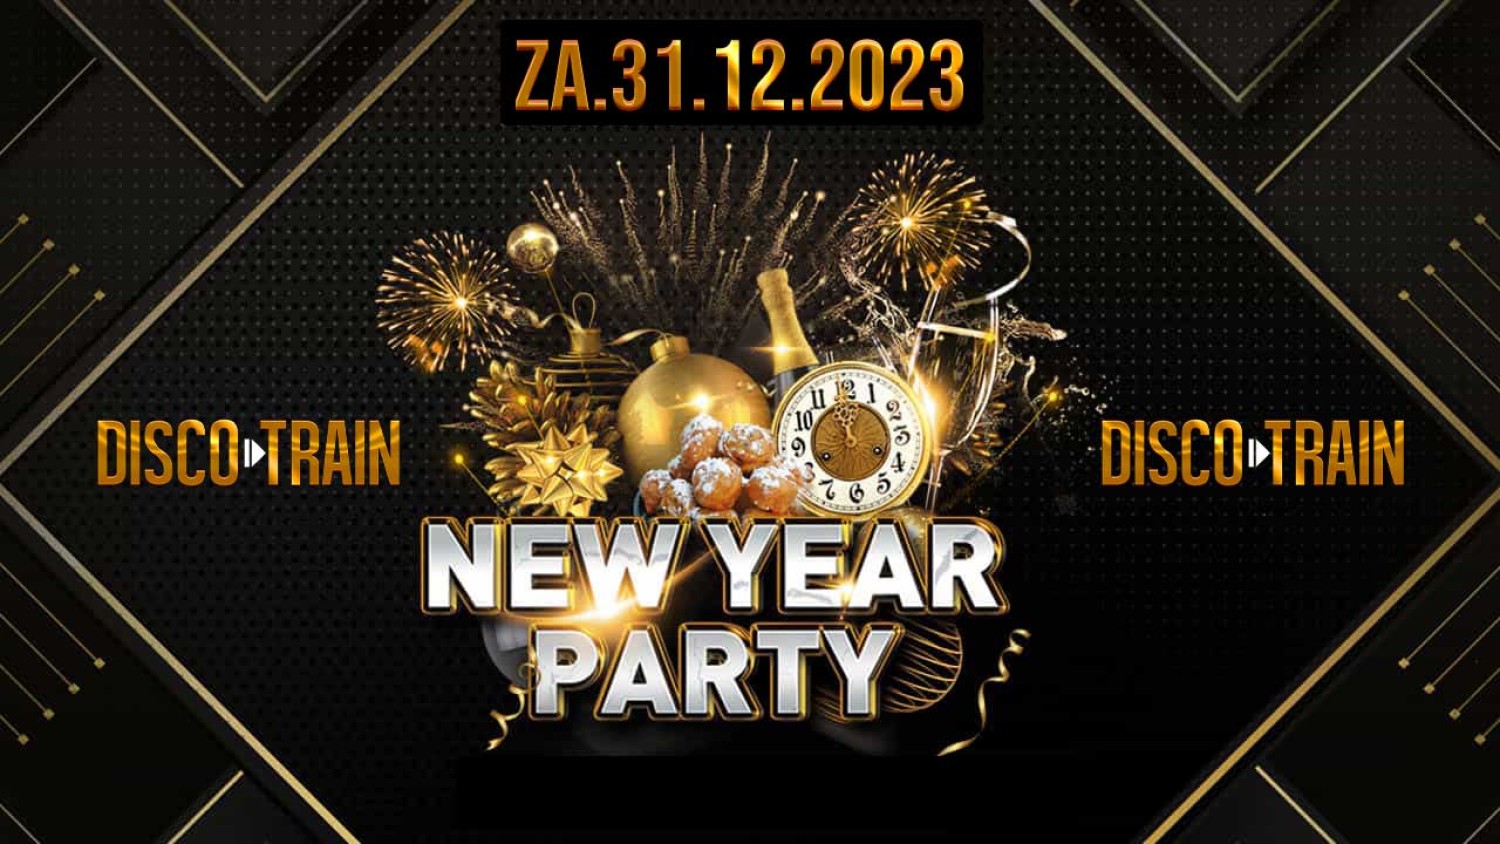 Disco-Train New Year Party